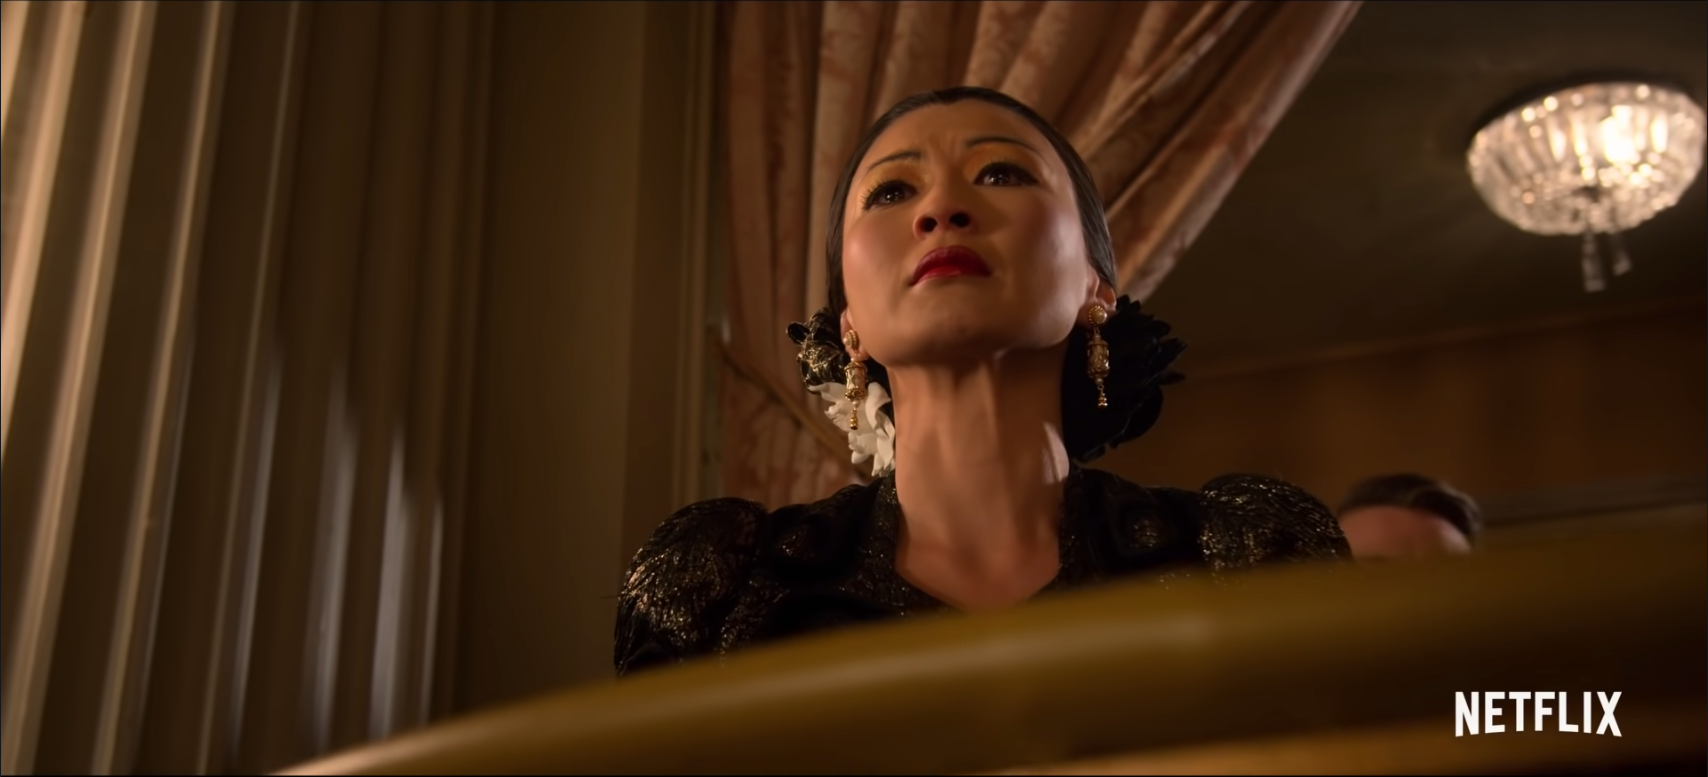 Screenshot of Anna May Wong from Hollywood tv series trailer on YouTube by Netflix